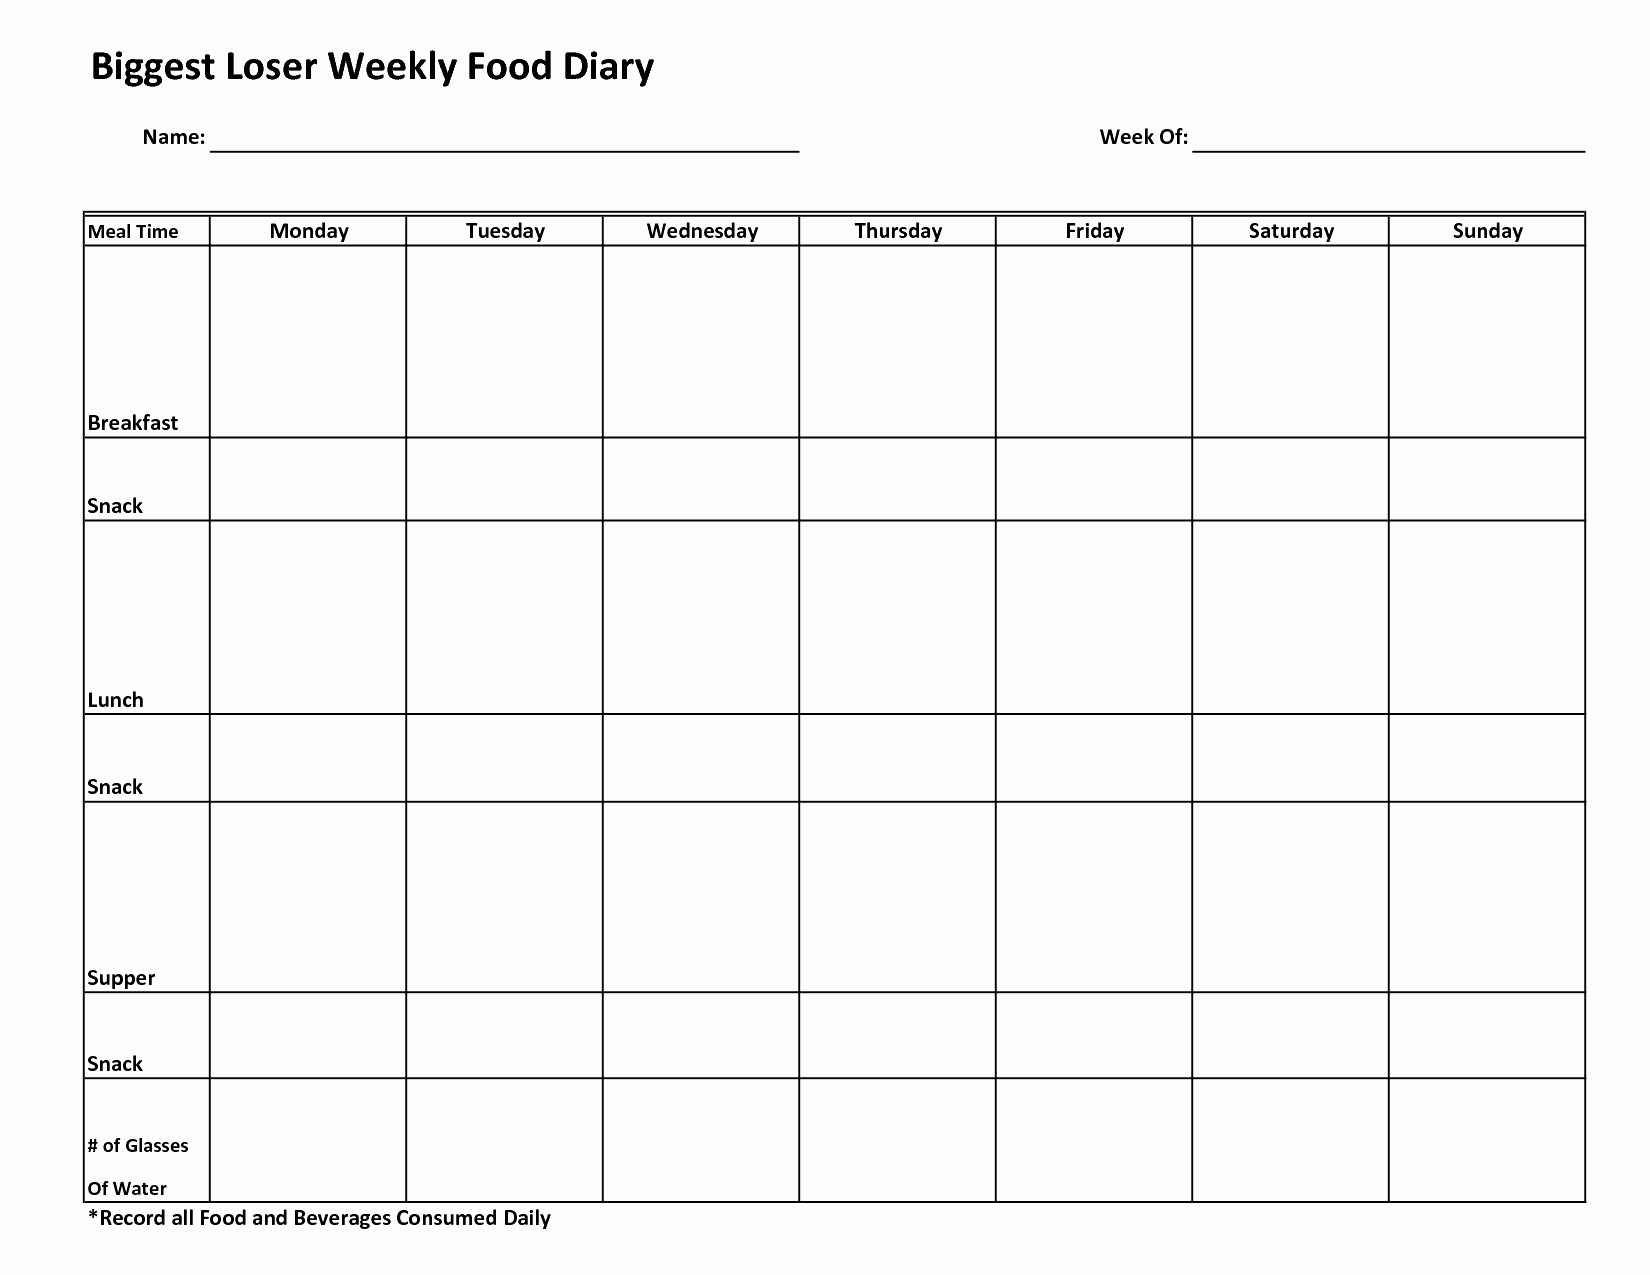 Biggest Loser Weight Loss Calculator Spreadsheet 2018 Excel Document